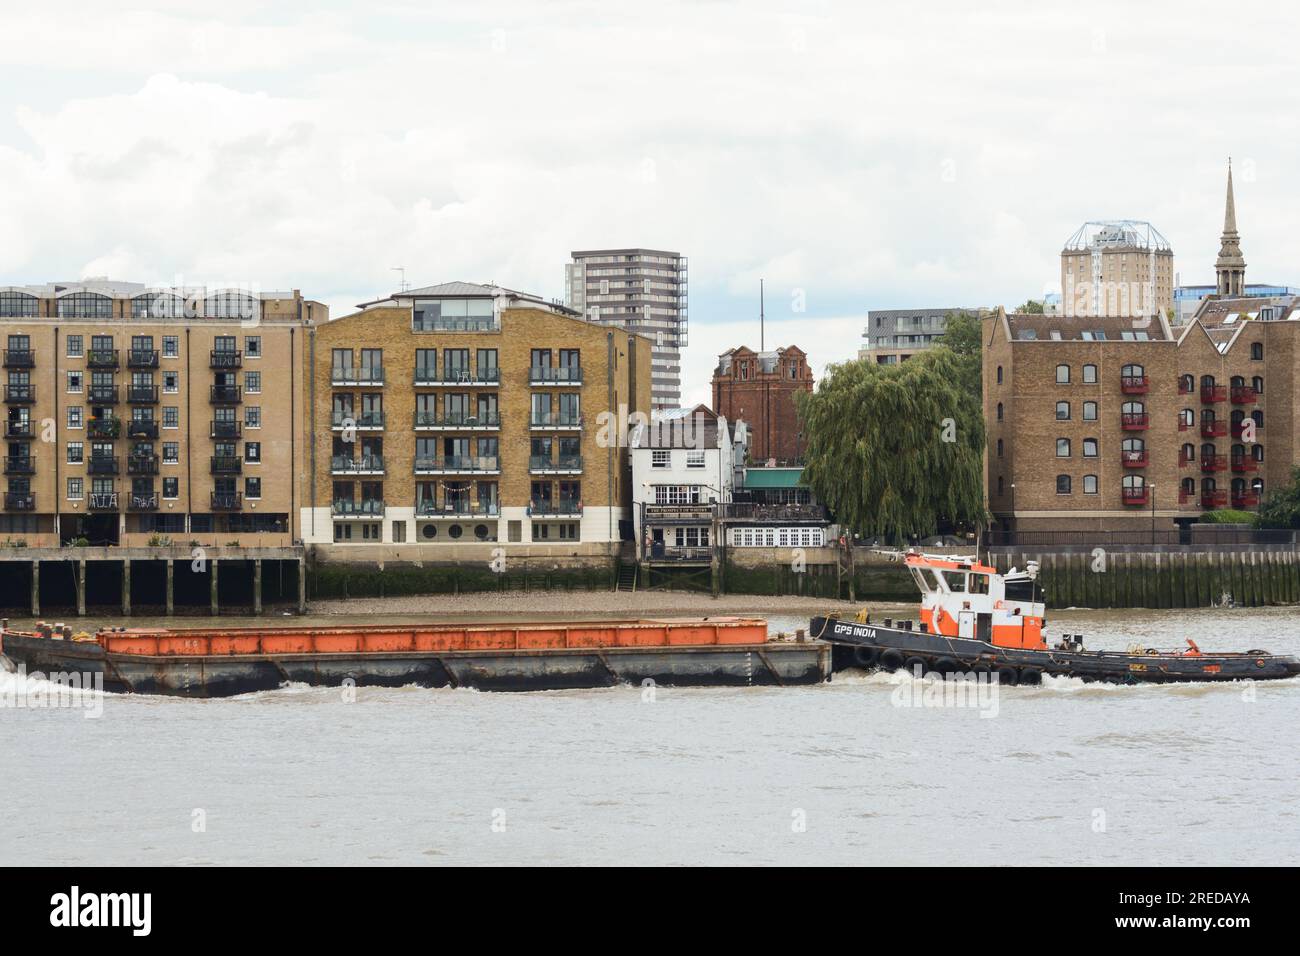 The GPS tug India passing the Prospect of Whitby - an historic public house on the banks of the River Thames at Wapping, London, E1, England, U.K. Stock Photo